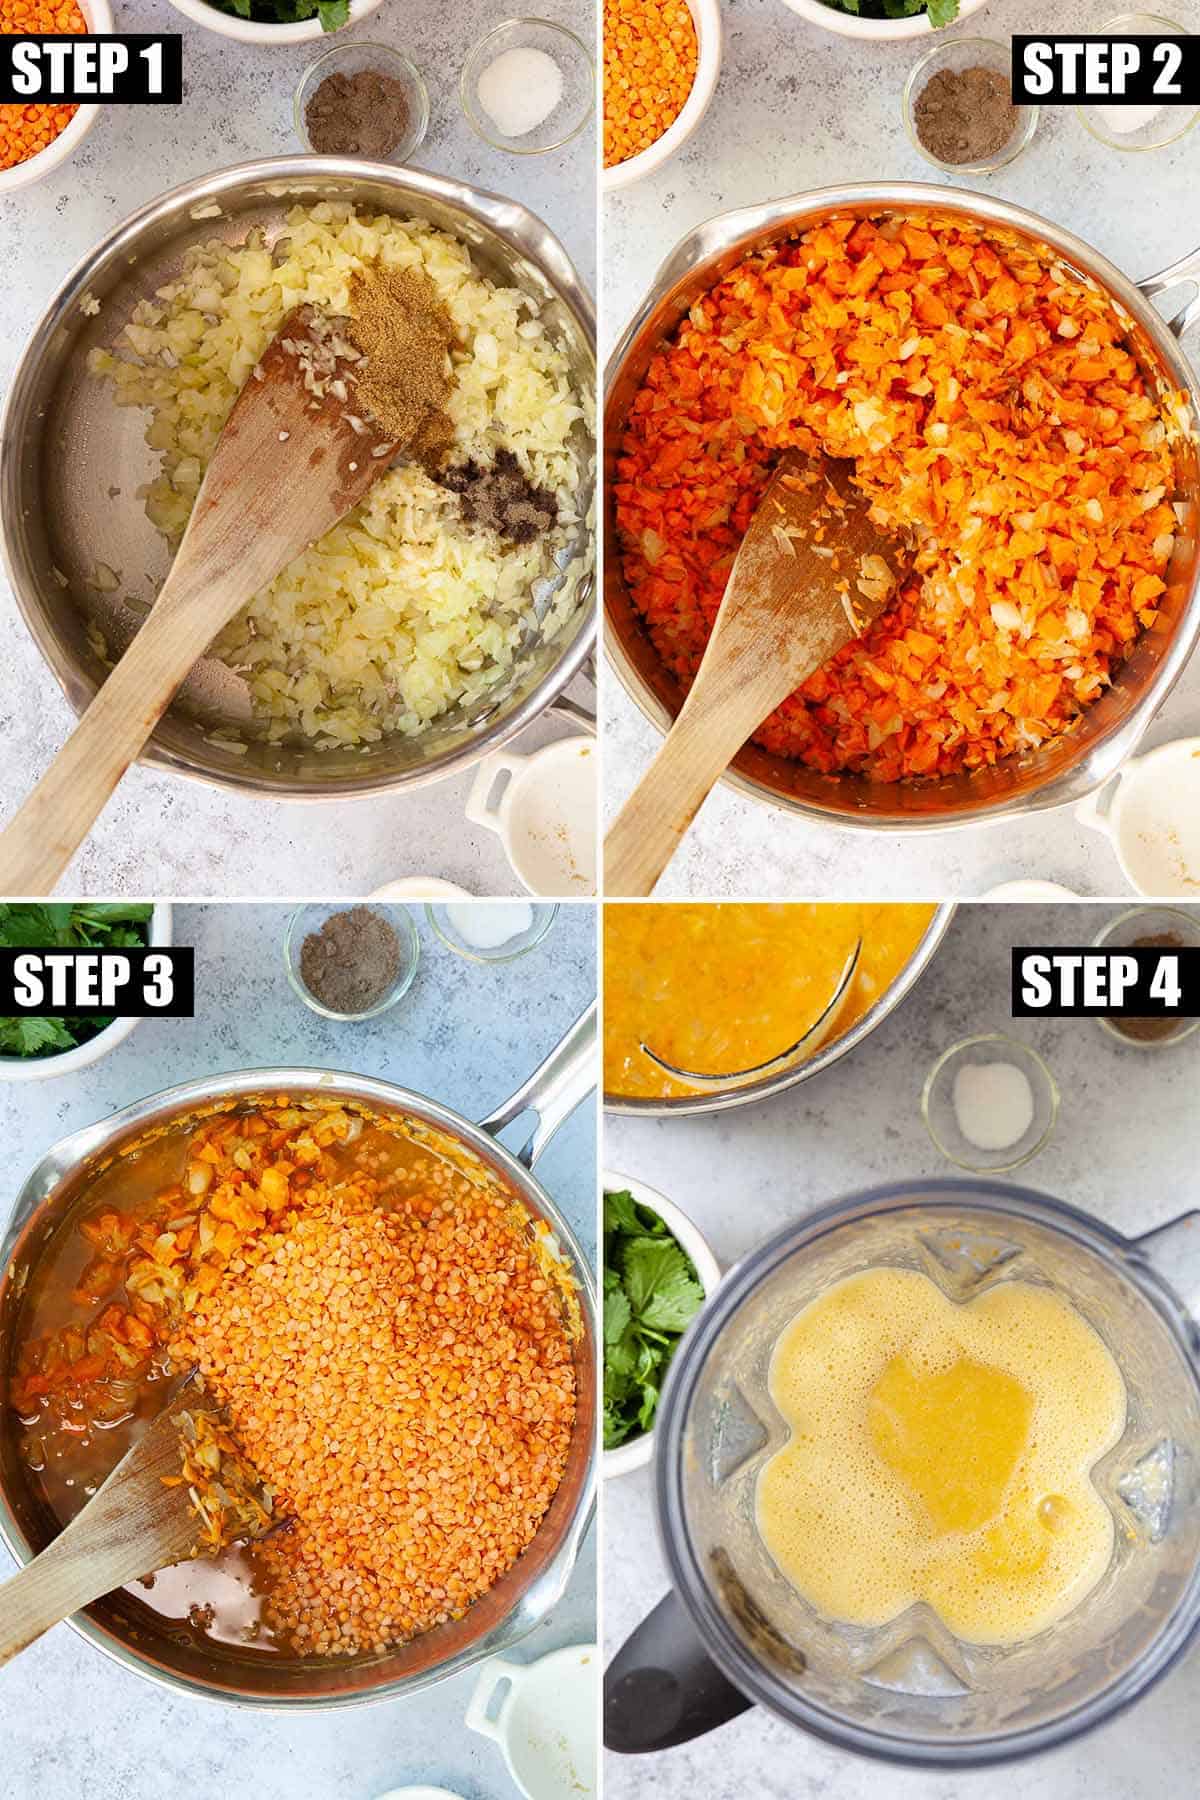 Collage of images showing vegetables being cooked and blended to make soup.